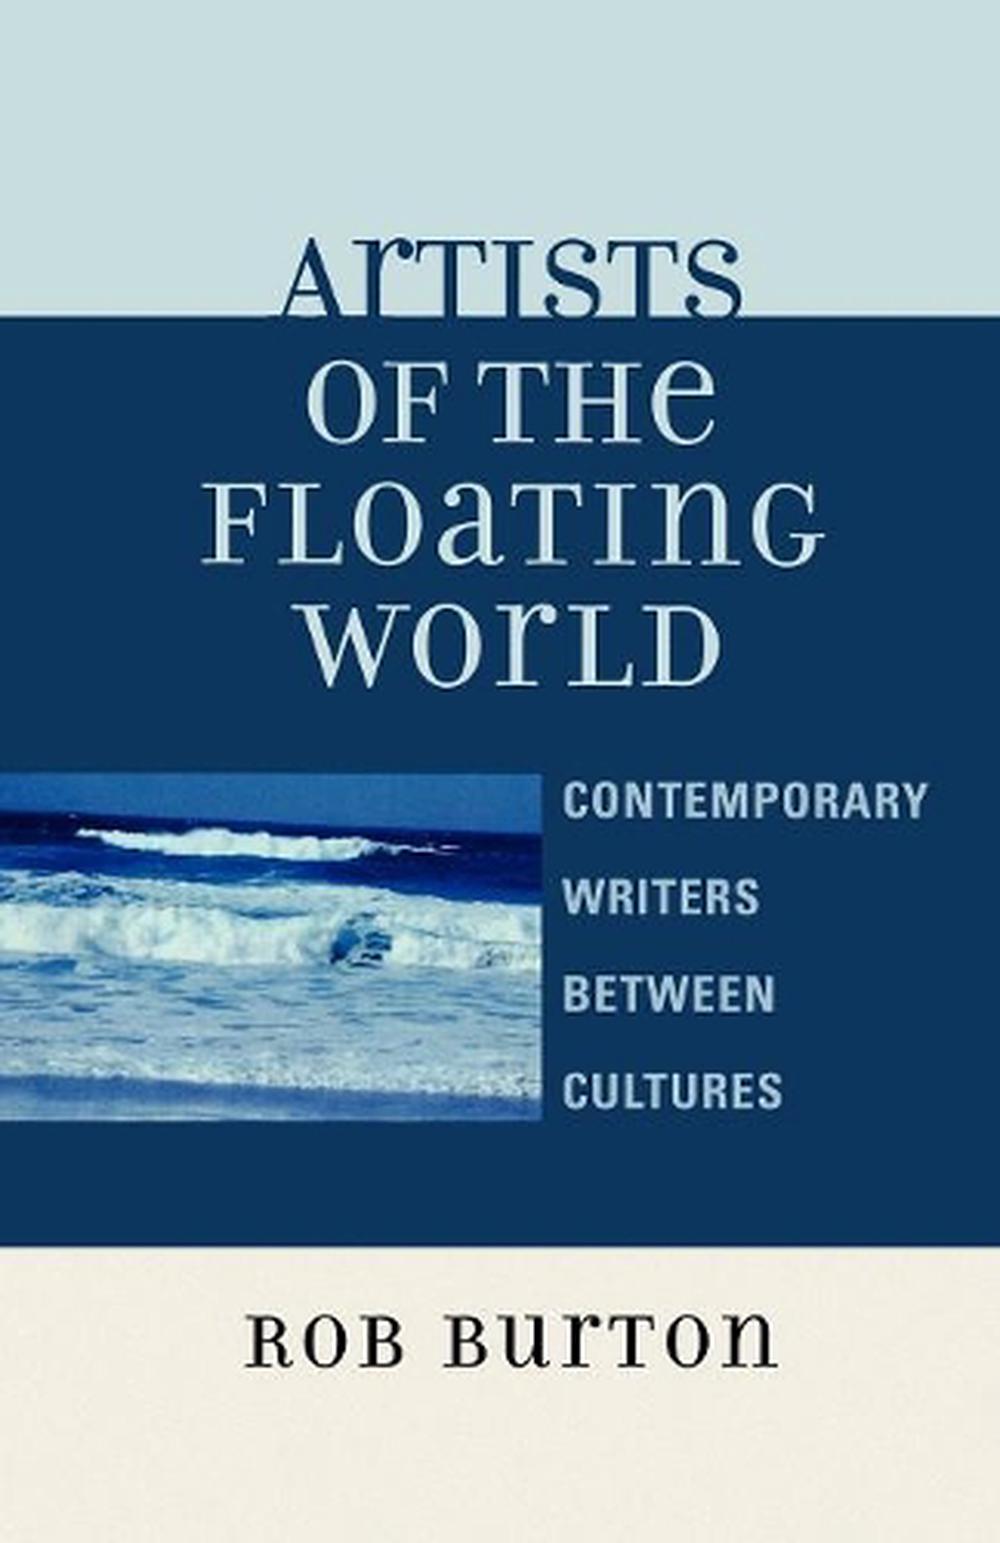 an artist of the floating world book